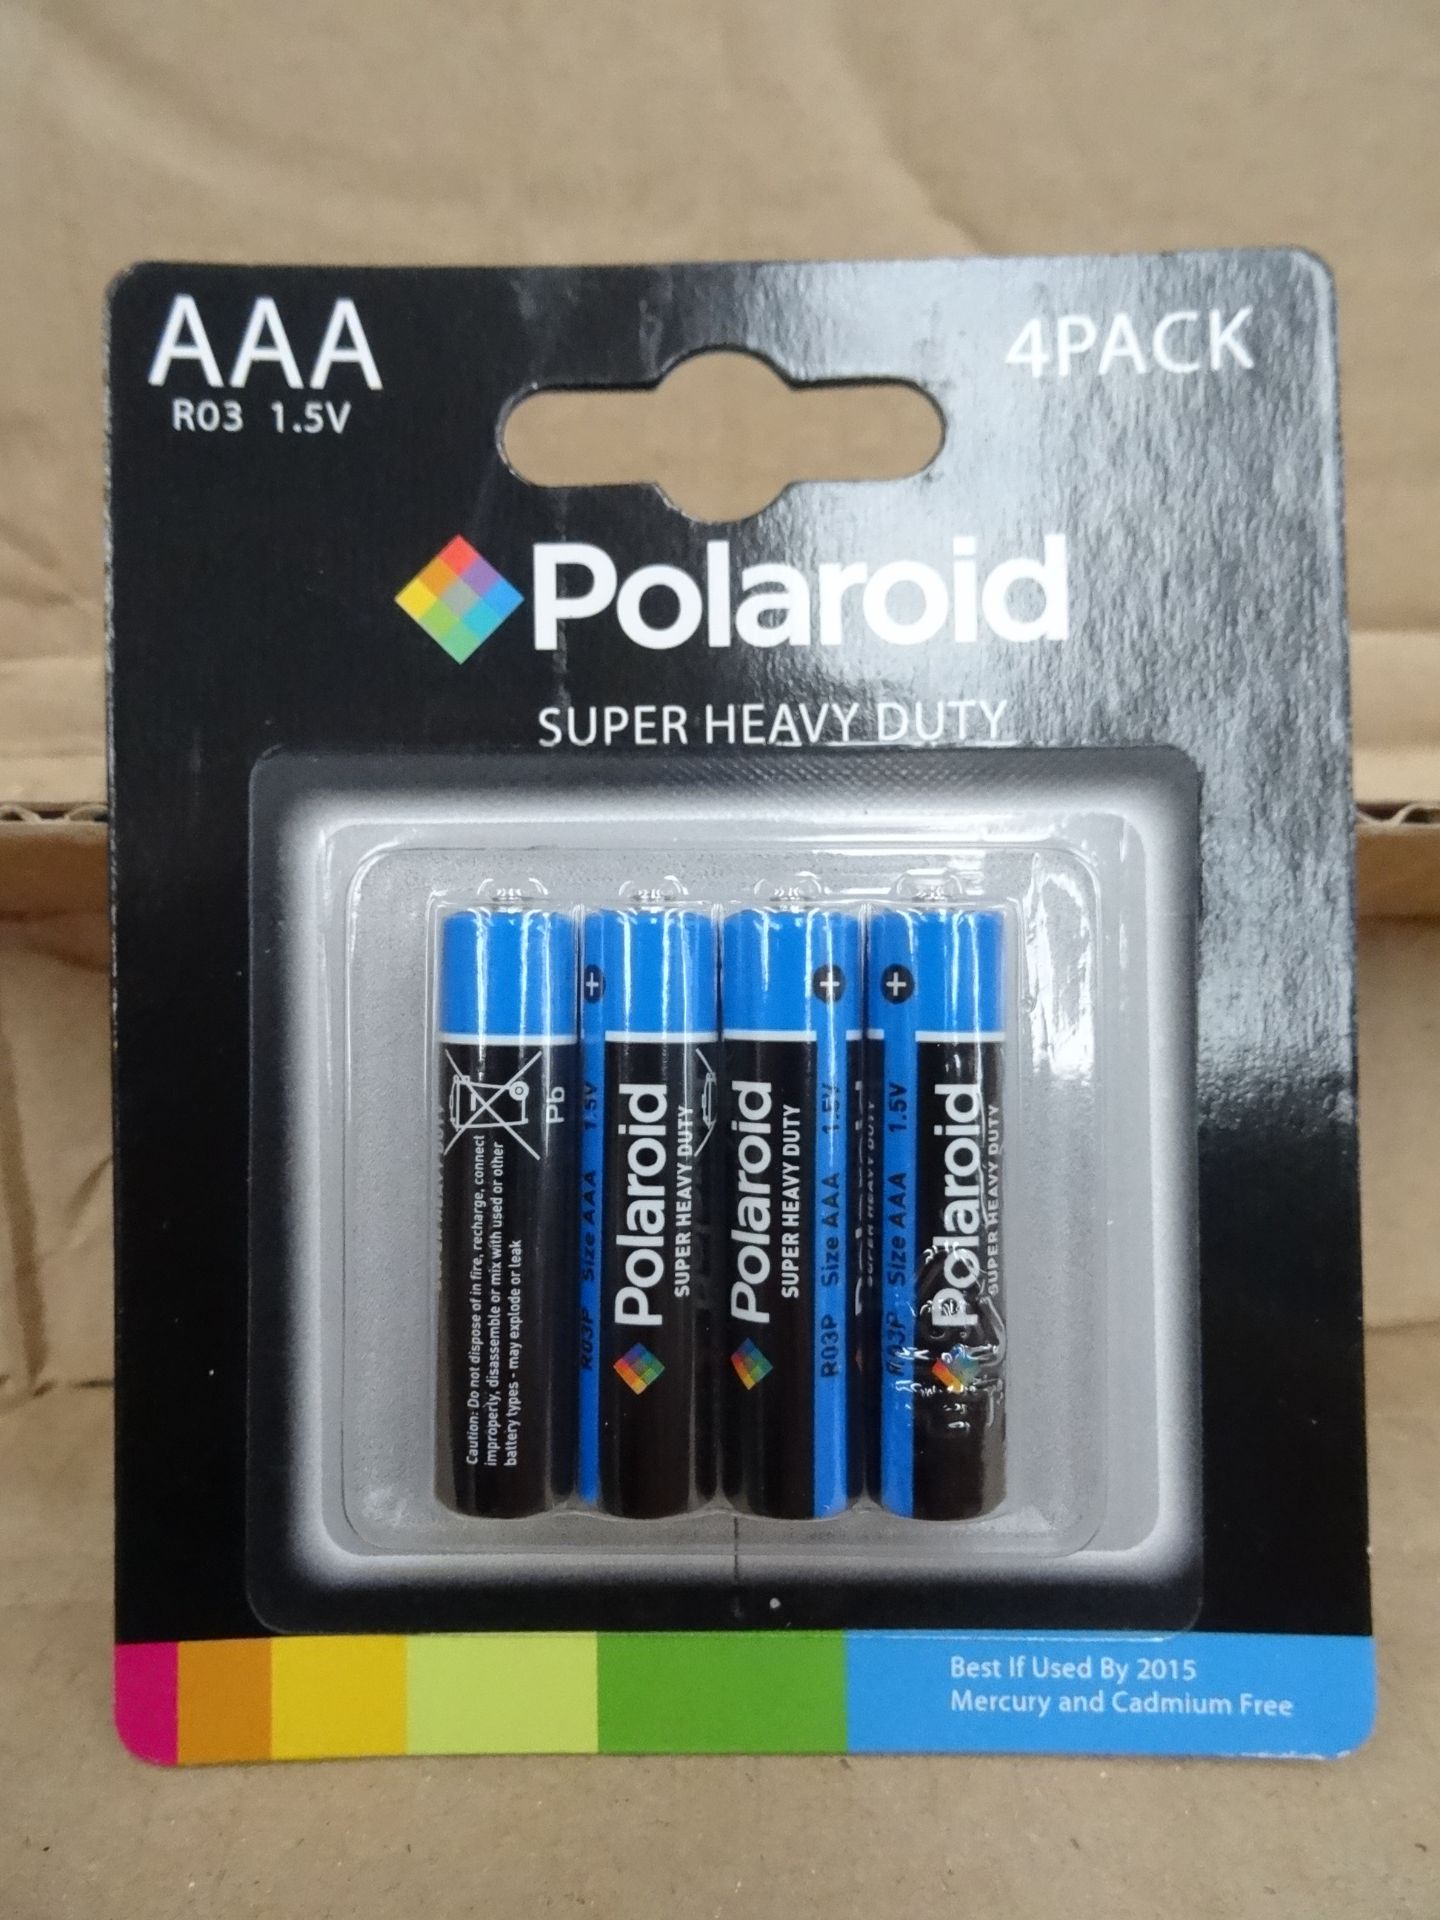 47 x Packs of 4 Polaroid Super Heavy Duty AAA Size Batteries, Brand new and Packaged! BBE Date